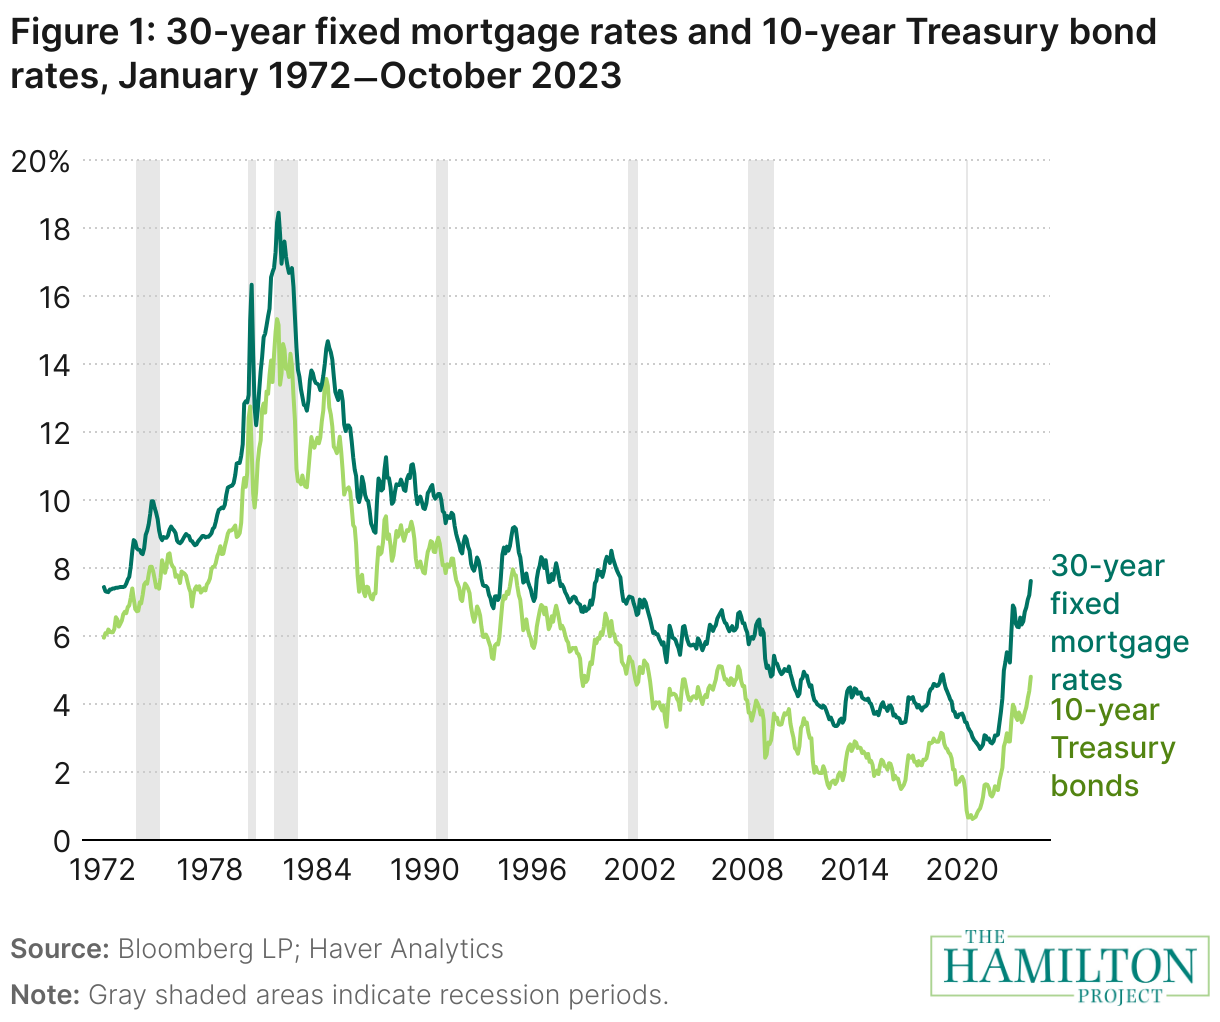 Figure: 30=year fixed mortgage rates and 10-year Treasury bond rates, 1972 to 2023